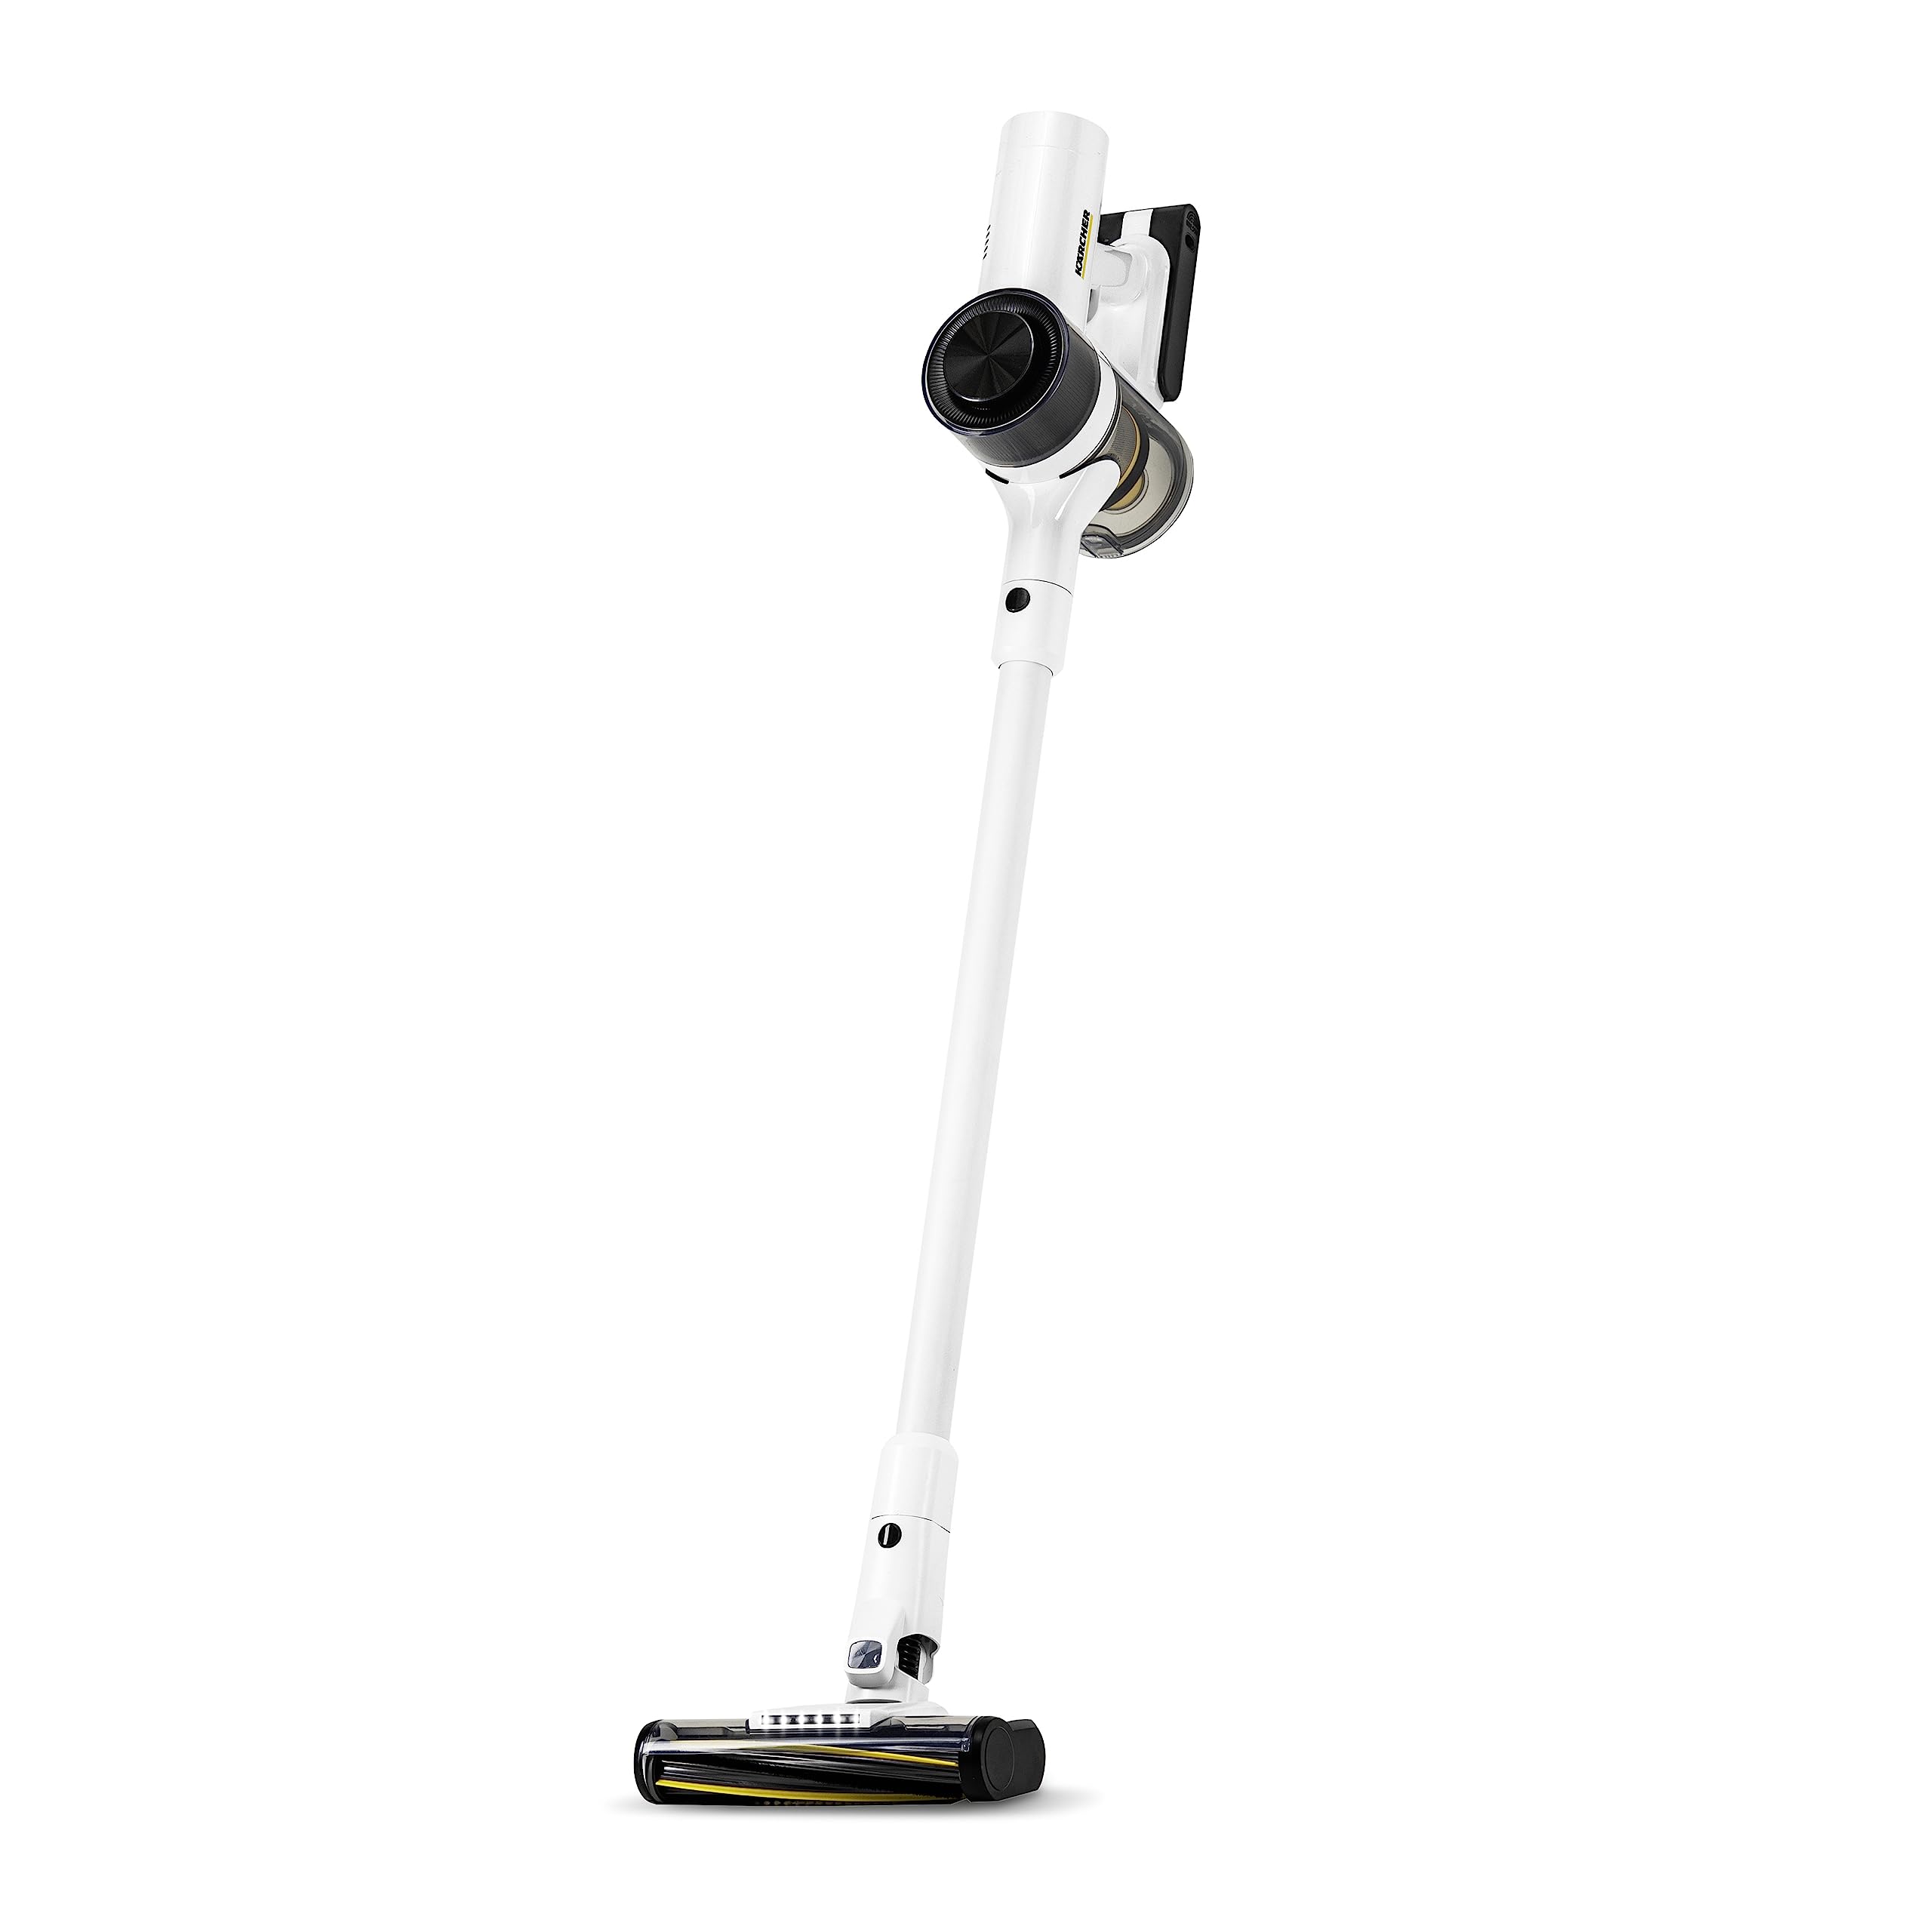 Kärcher - VCN 4 Cordless Stick Vacuum - 450 W Motor - LCD Display - 3 Power Levels - 71 Minute Runtime - With Accessories,White